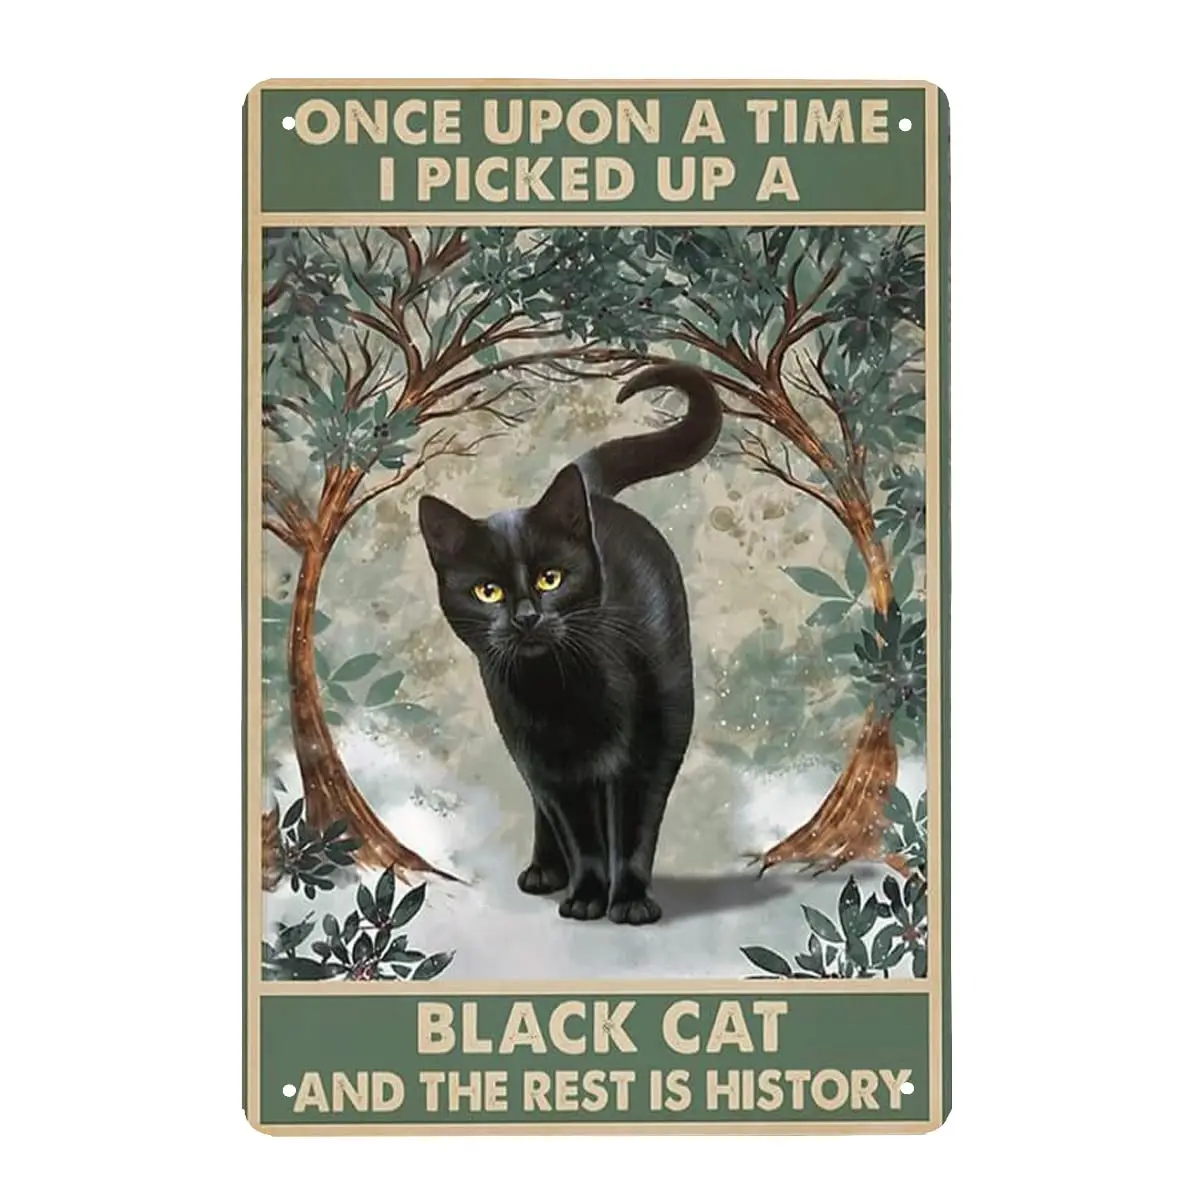 

Vintage Metal Tin Sign Once Upon a Time I Picked Up a Black Cat and The Rest is History Retro Metal Tin Sign Wall Decor 8x12 In